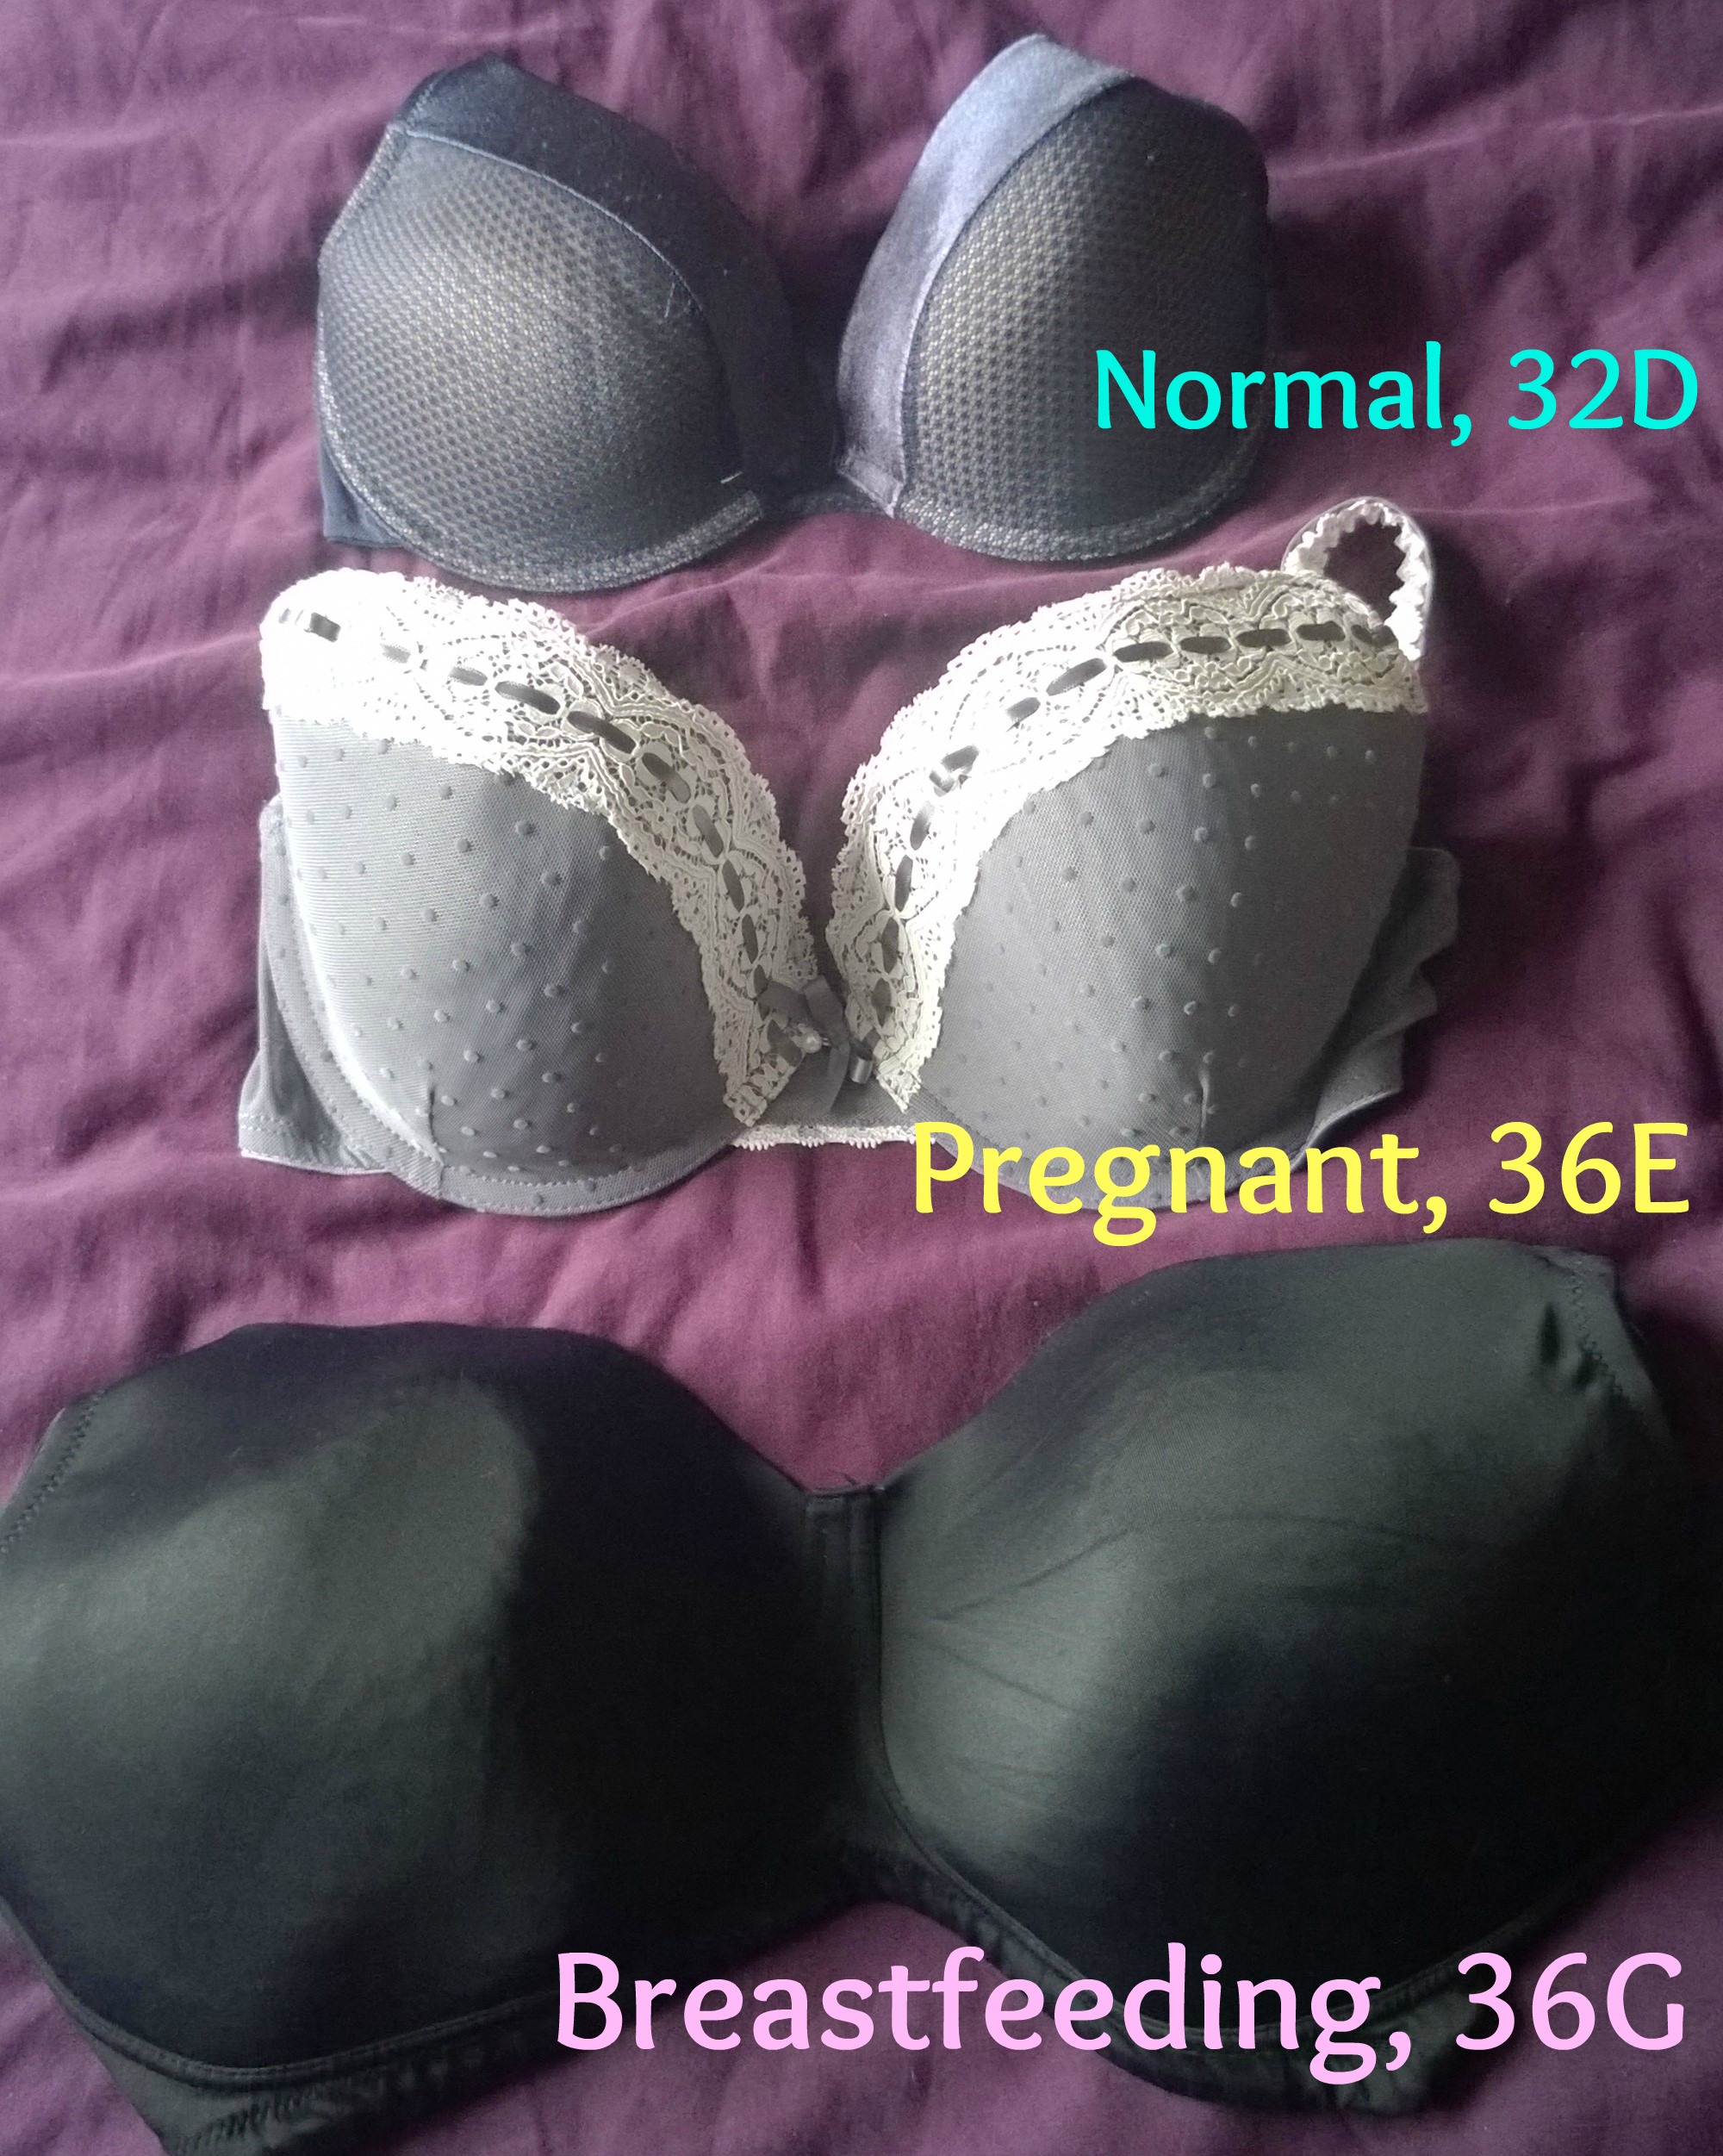 I'm mid-sized with DDD boobs - I hate wearing bras, but I have to because I  need support